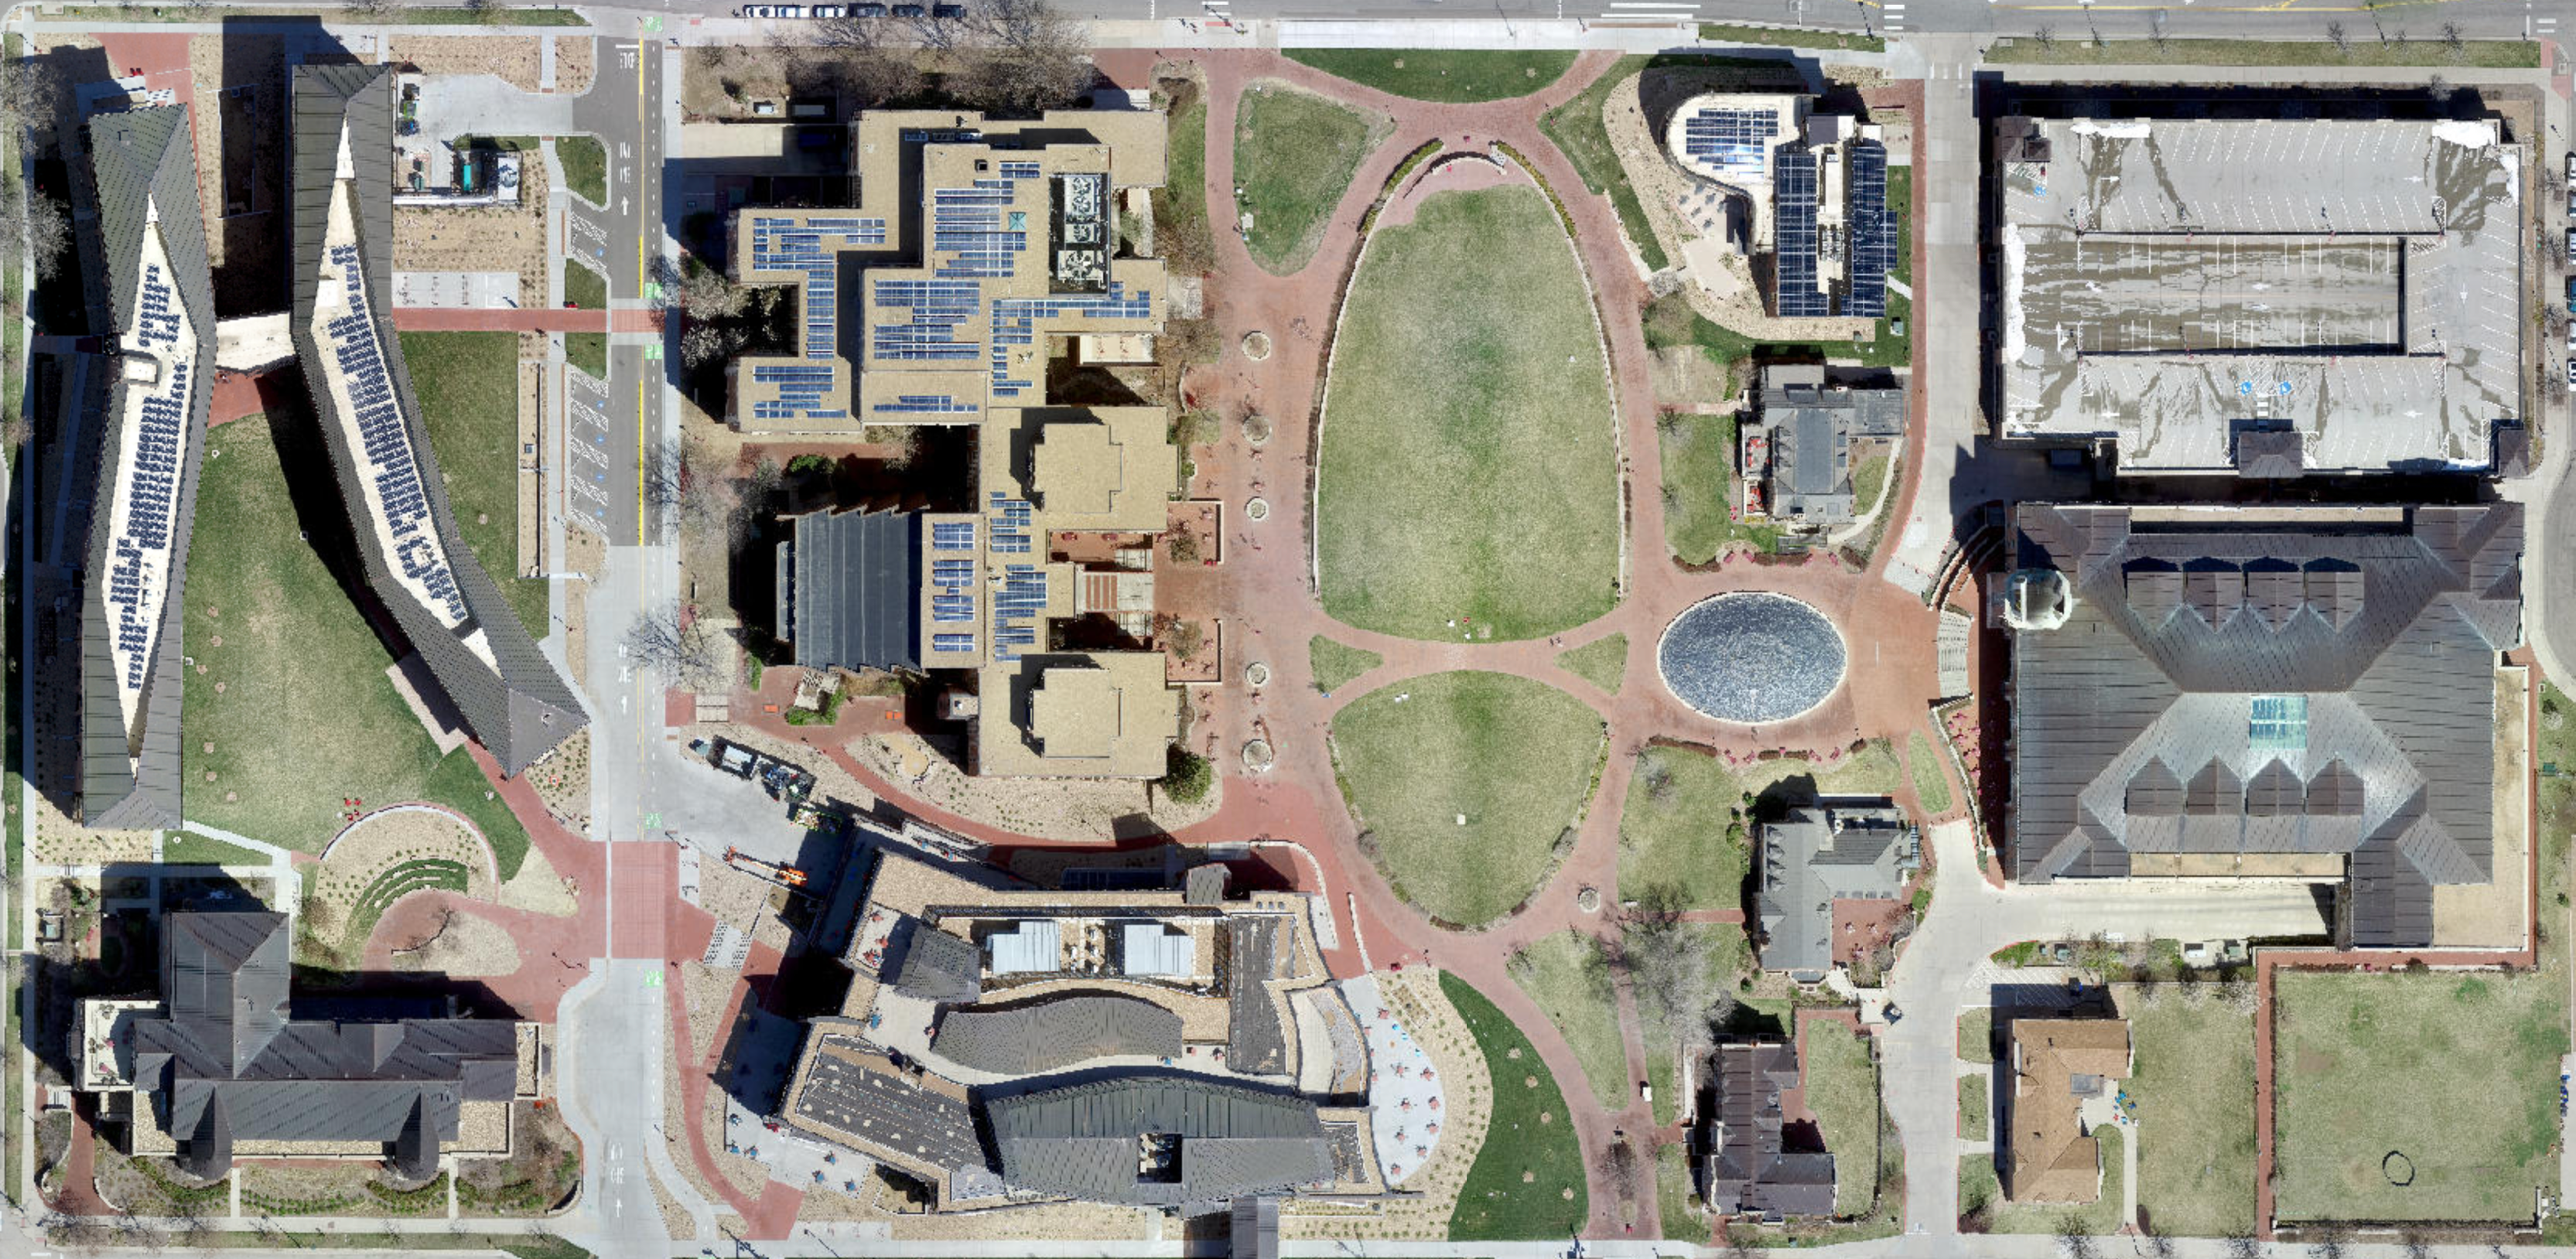 Overhead view of DU campus